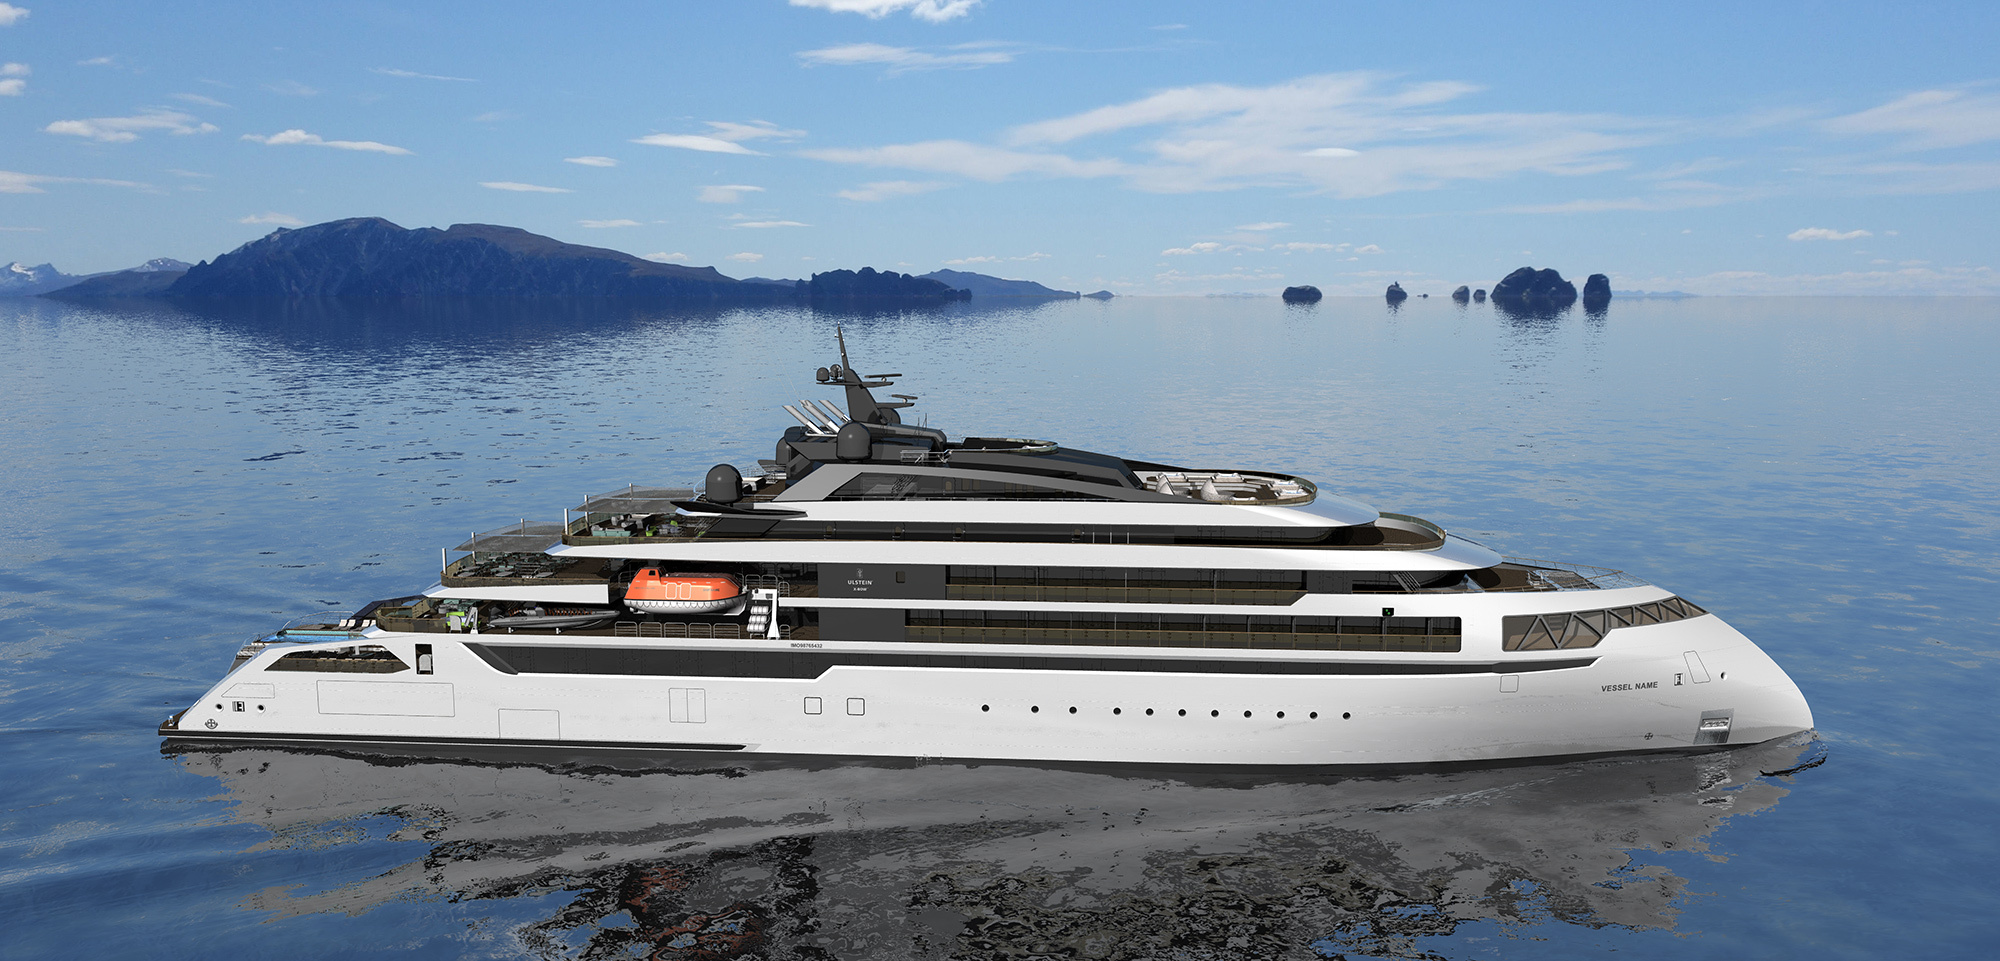 An ULSTEIN CX129 expedition cruise vessel with room for alternative energy sources.